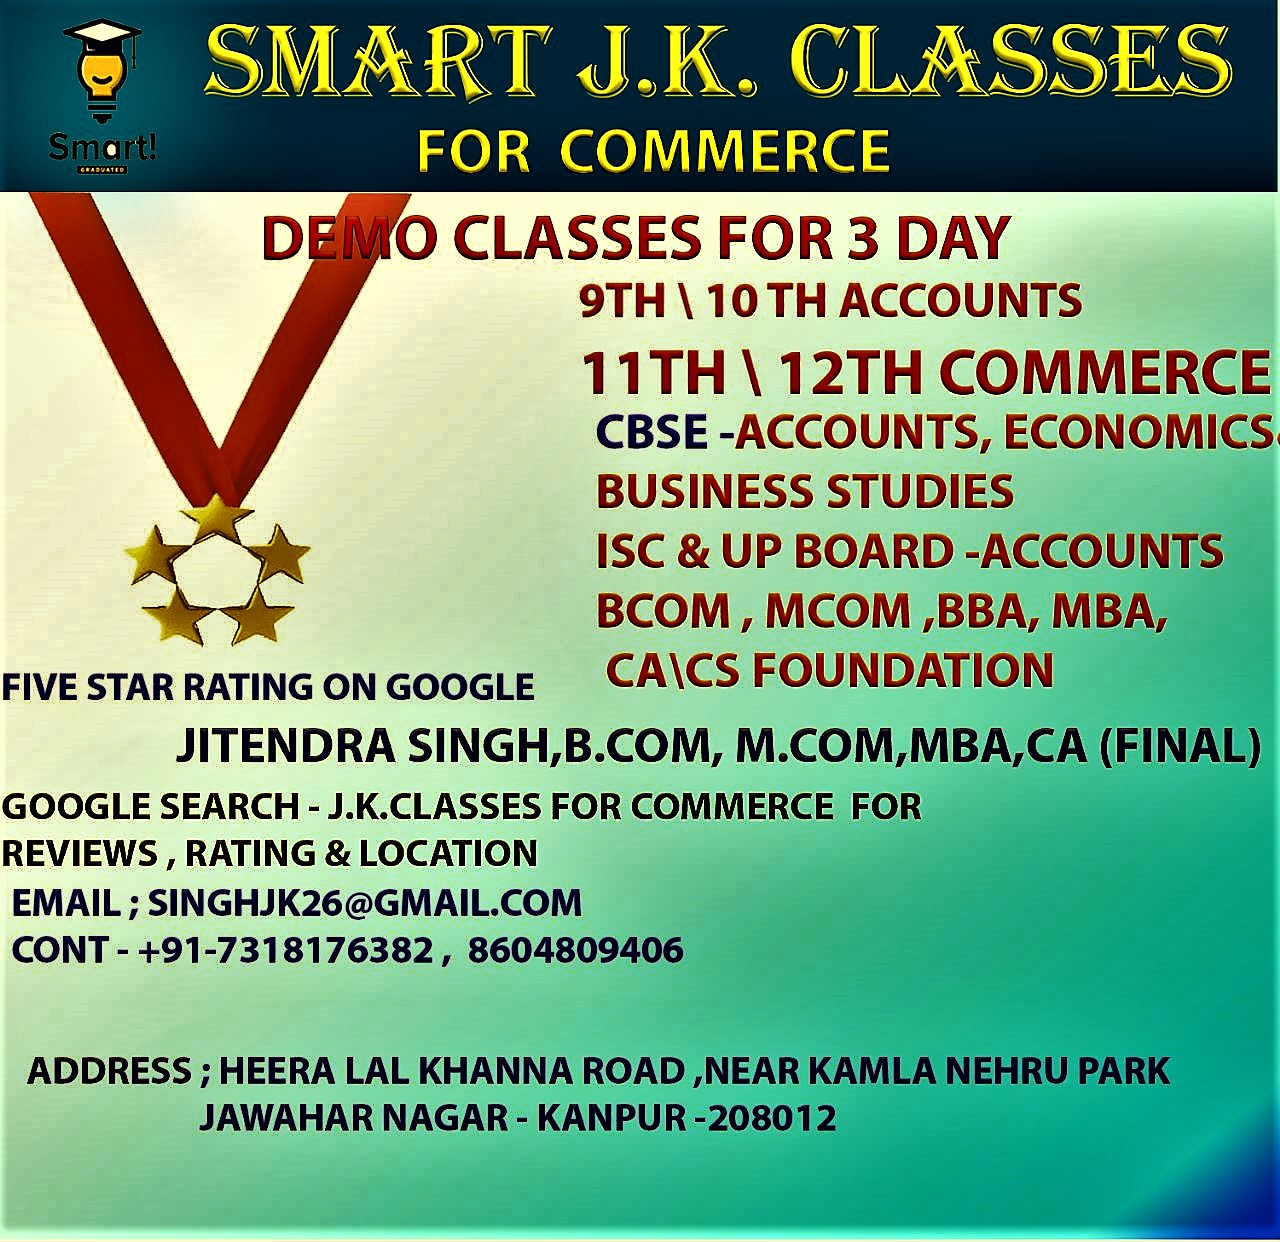 24089SMARTJK.CLASSES for COMMERCE
Class 11th Accountancy